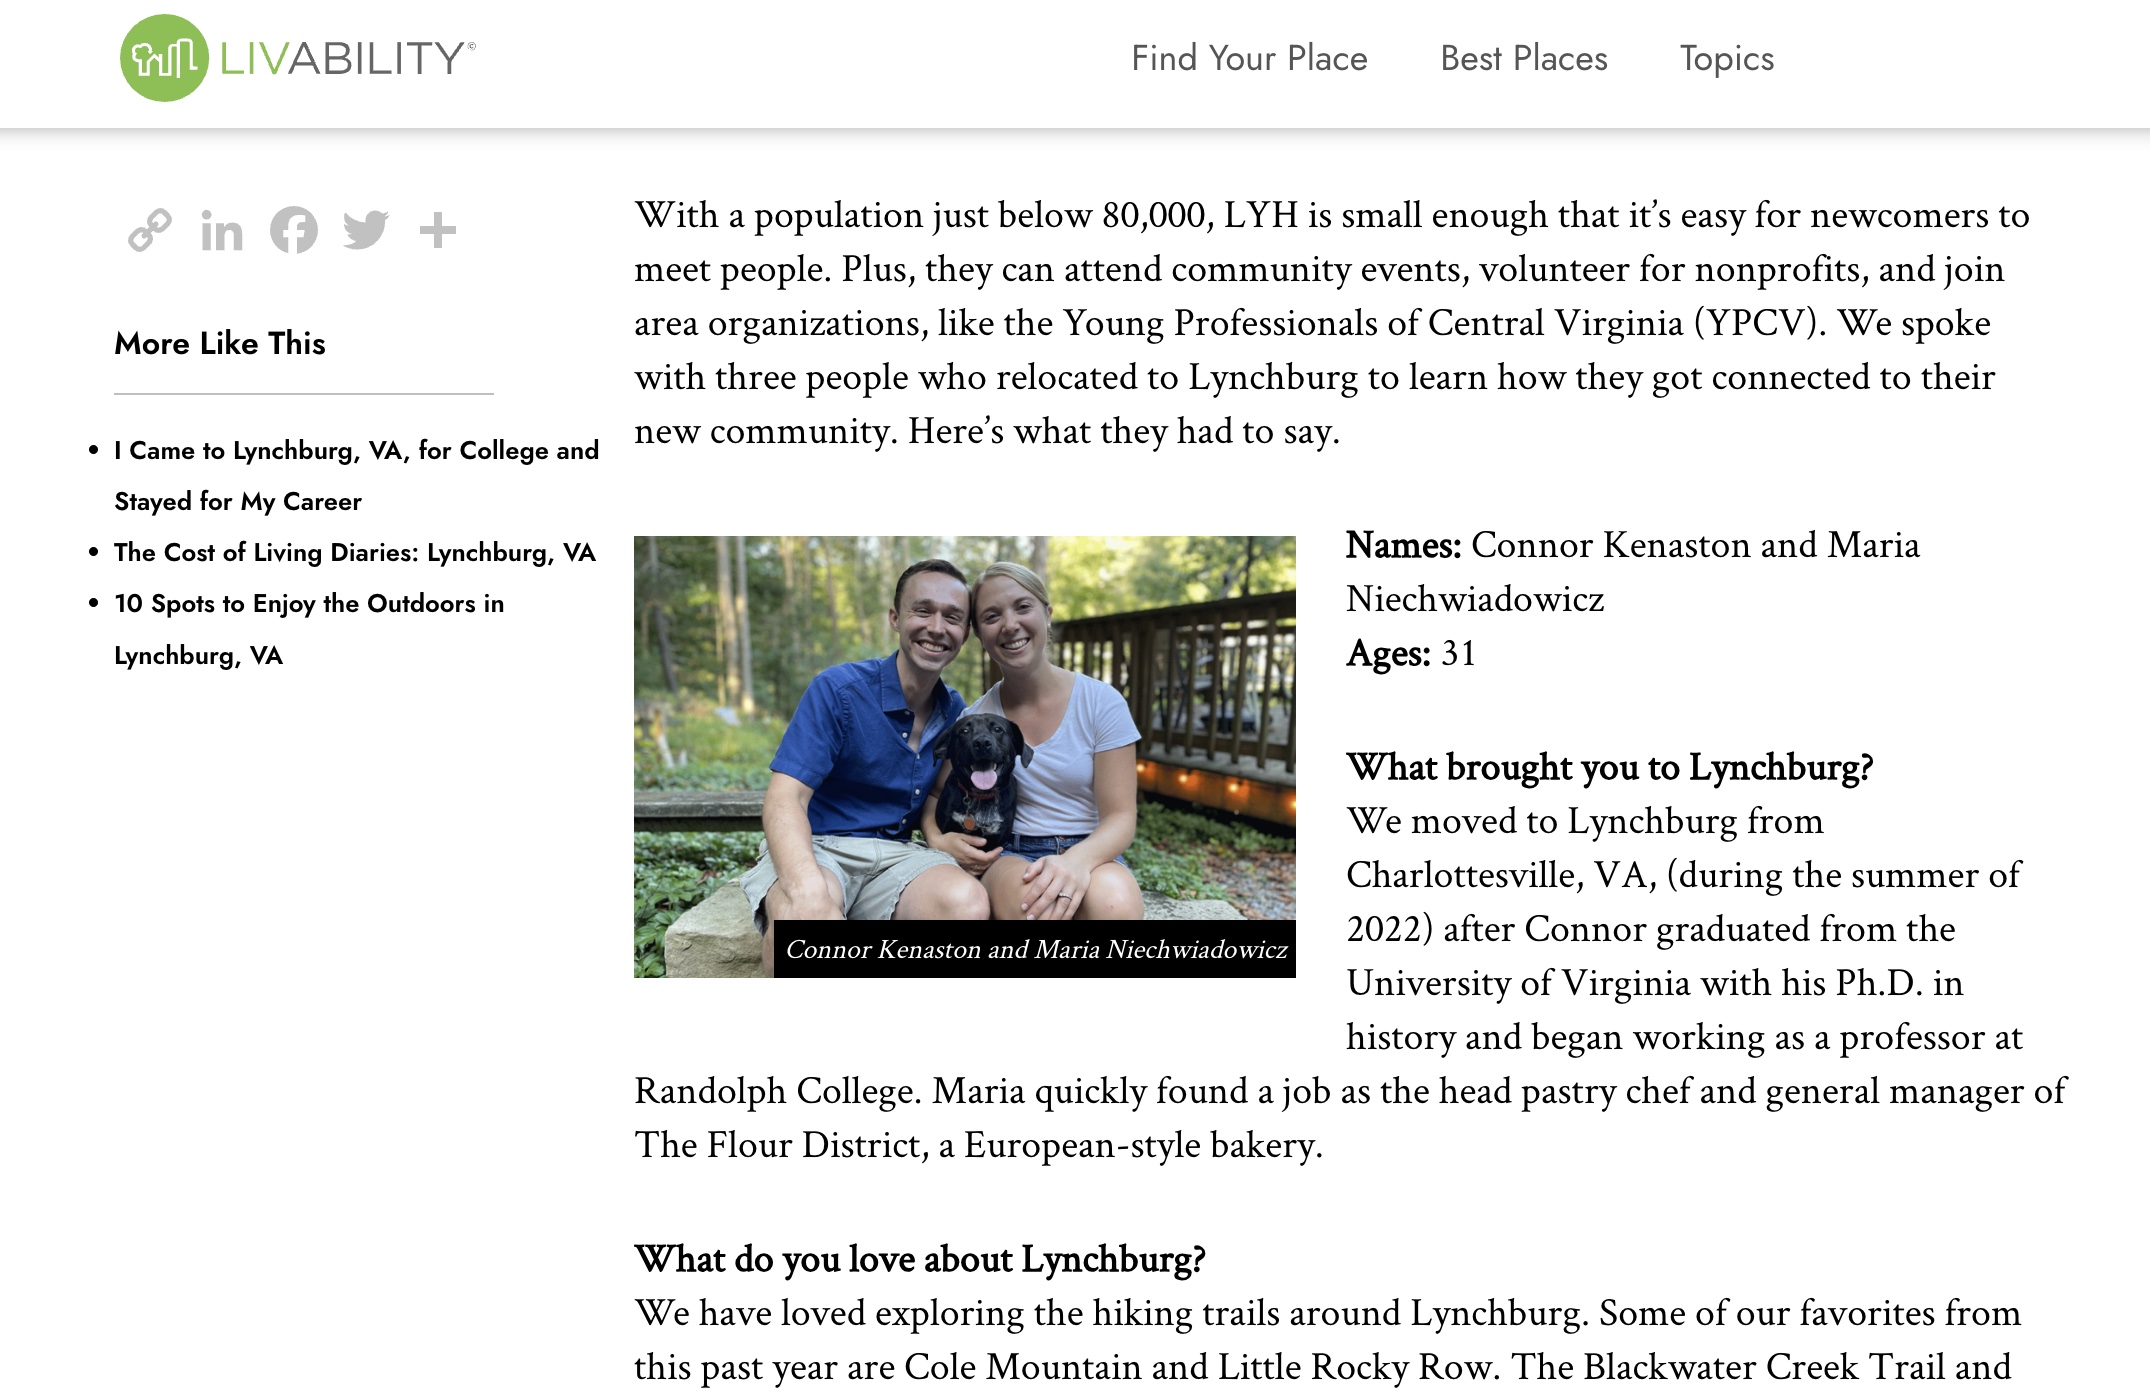 Screenshot of article featuring Connor Kenaston and Maria Niechwiadowicz. The screenshot includes text that can be found in the article, as well as a photo of Connor, Maria, and their dog Franklin.